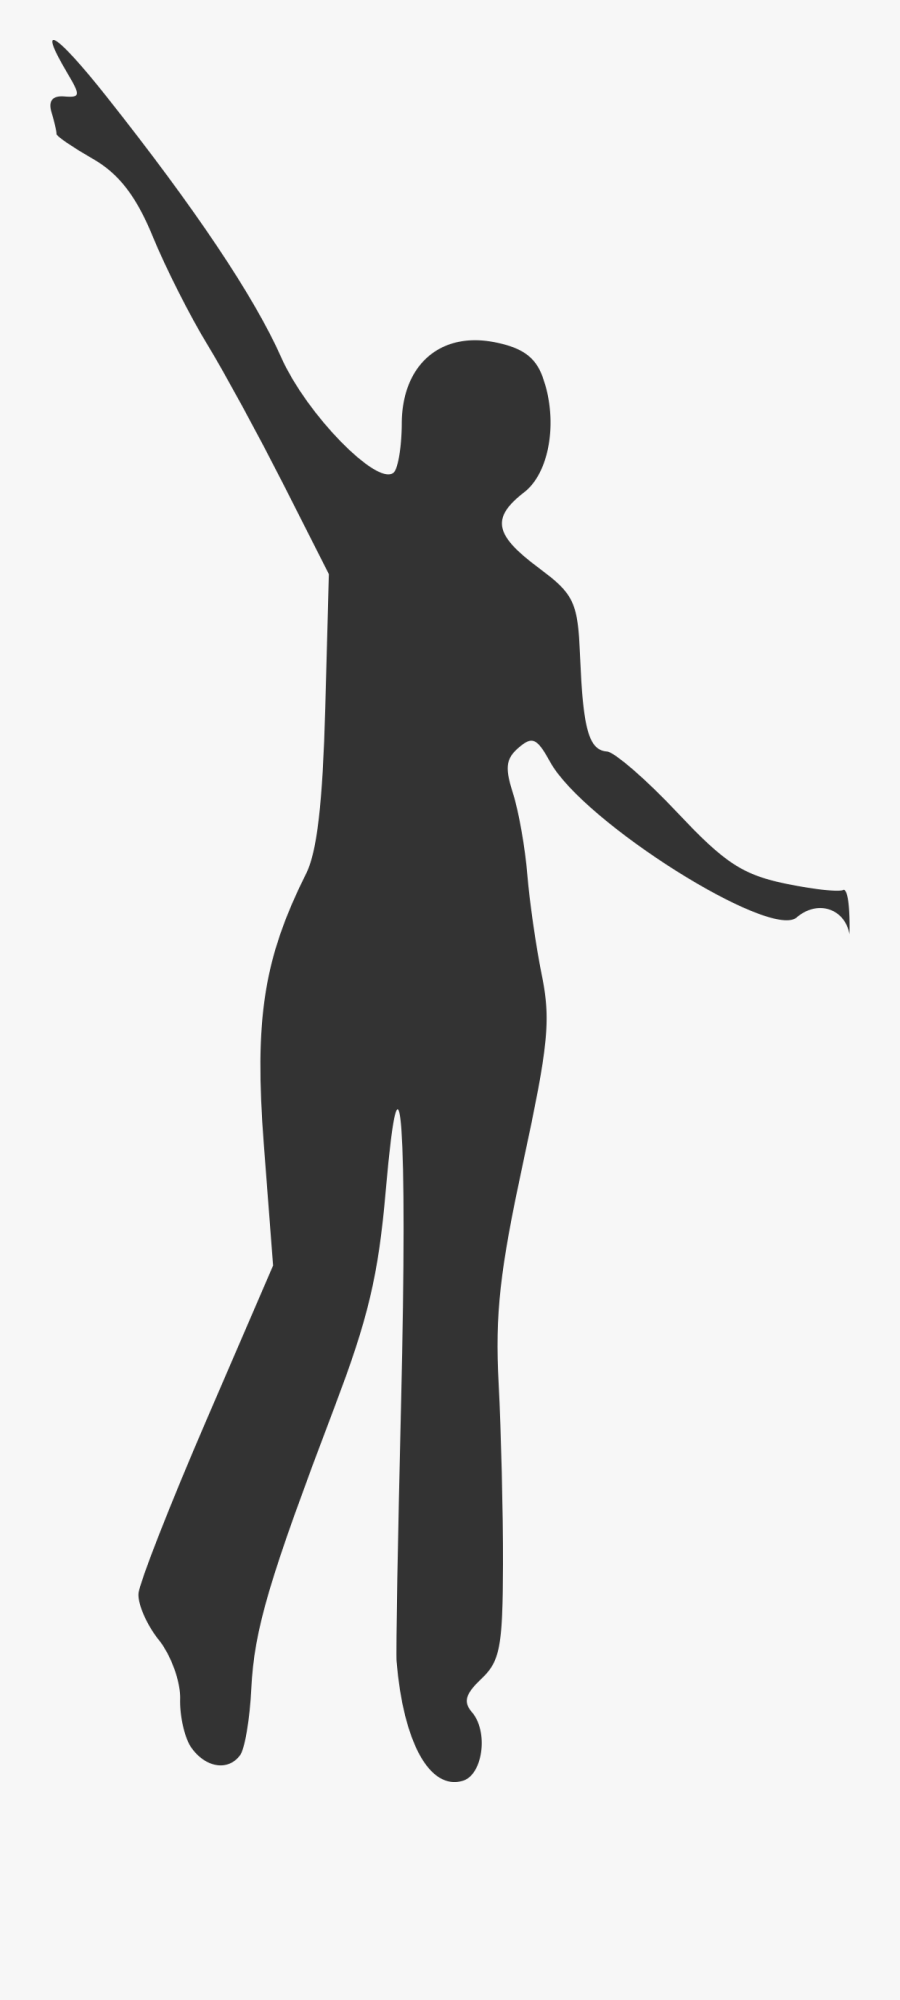 Silhouette Drawing Woman Clip Art - Woman Silhouette Pointing Png, Transparent Clipart